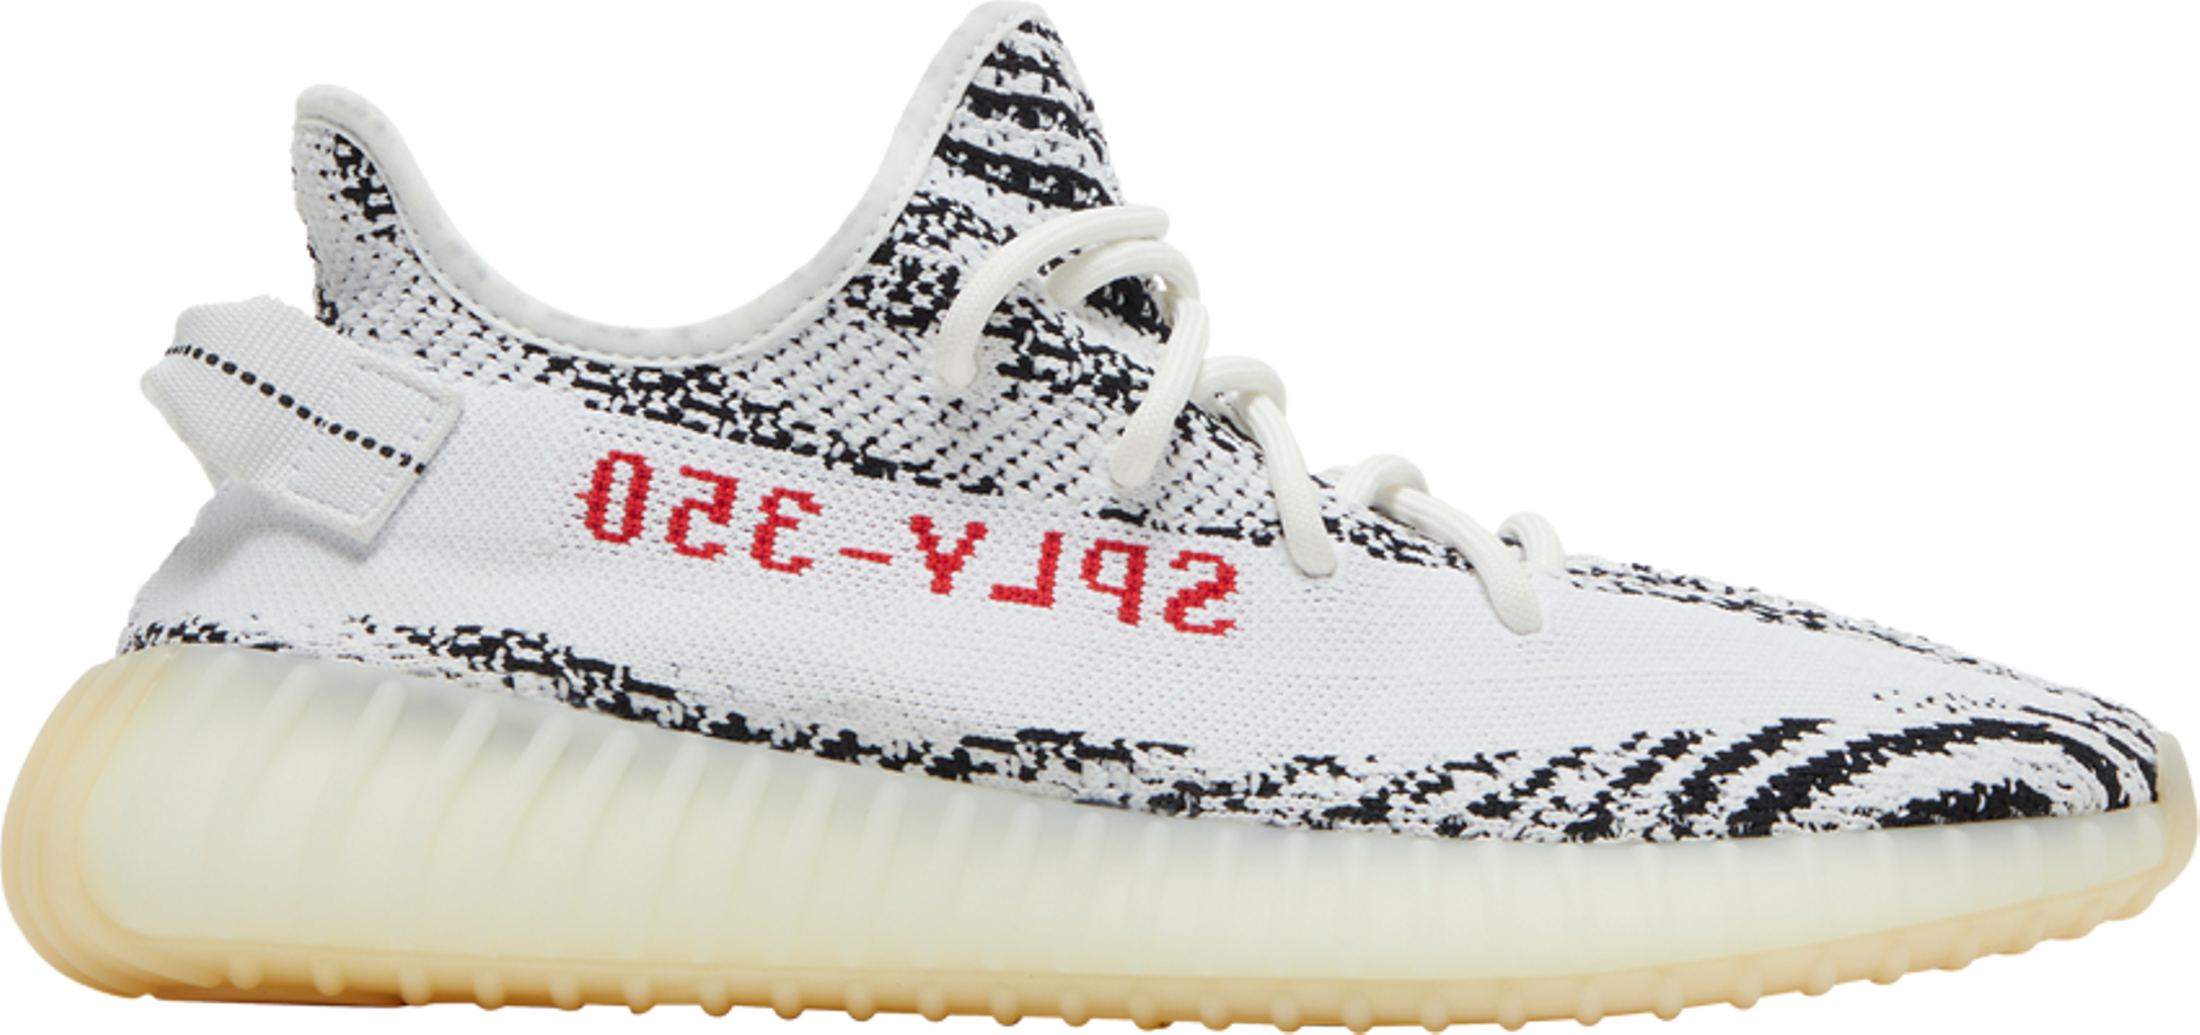 mini national flag Spænde Yeezy Boost 350 V2 'Zebra' sneakers for sale at Urban Necessities.